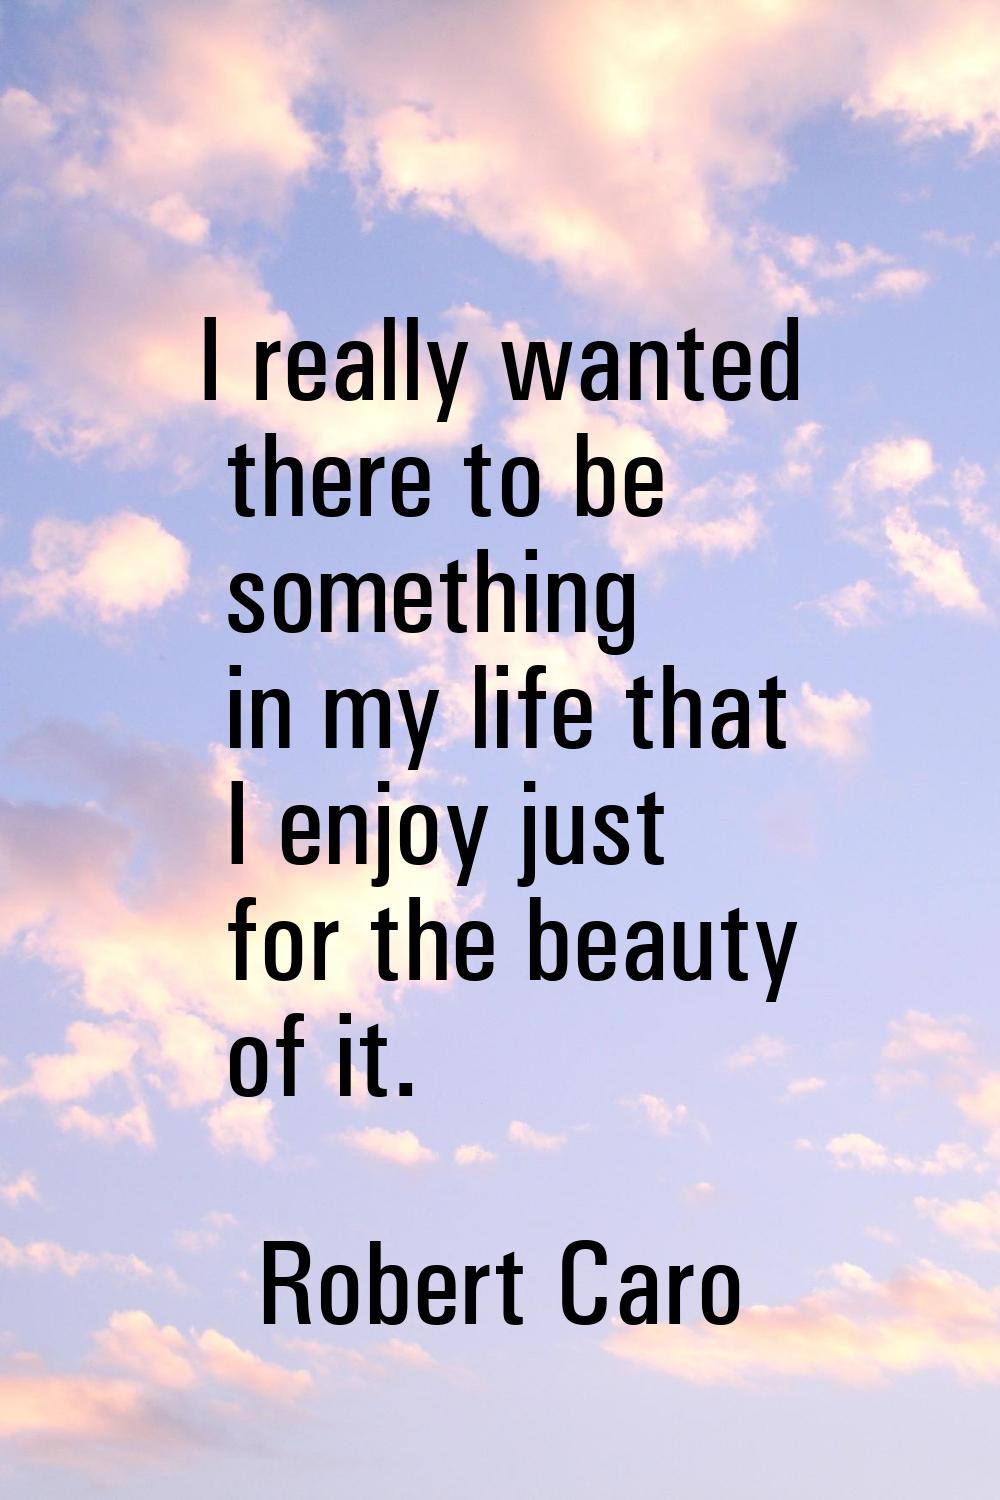 I really wanted there to be something in my life that I enjoy just for the beauty of it.